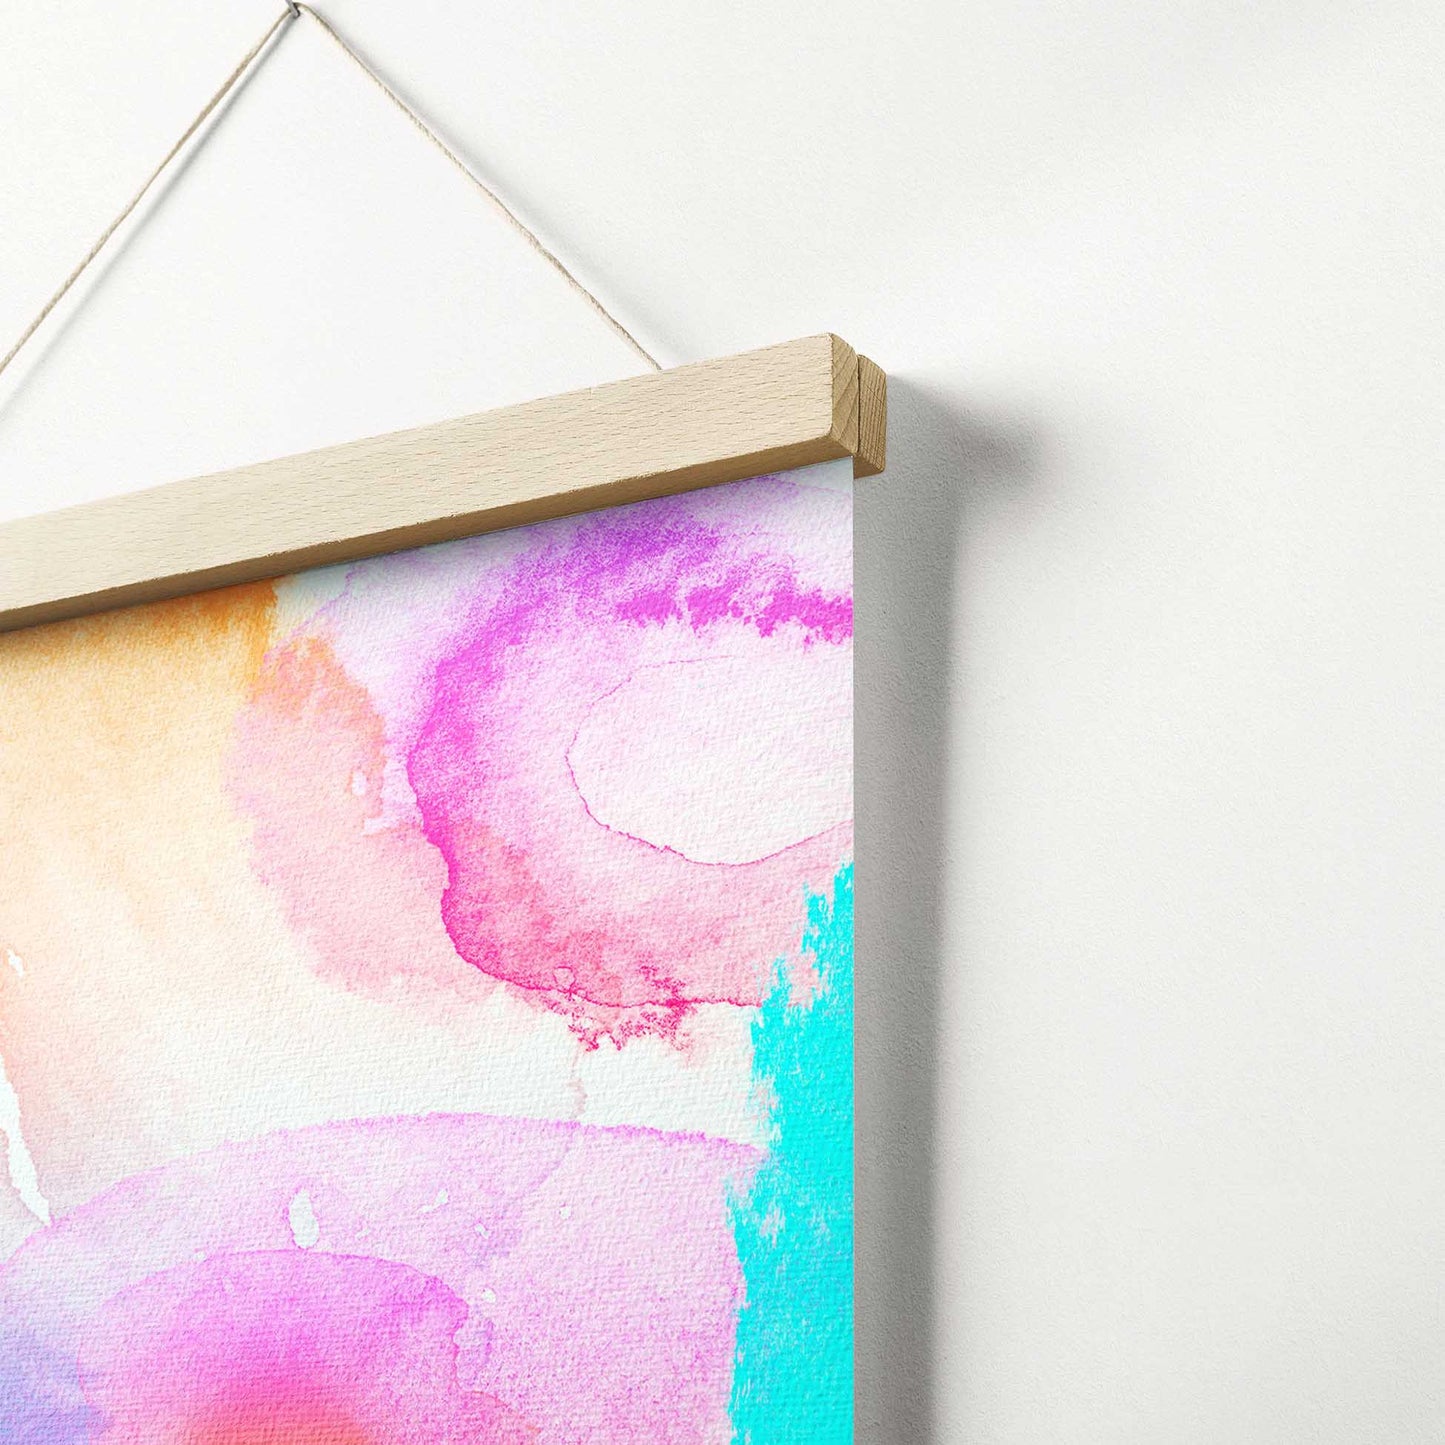 Expressive Home Decor: Make a statement with our Personalised Drawing Crosshatch Poster Hanger. The combination of vibrant colors, joy, and inspiration, along with the crosshatch texture effect, creates a stunning piece of wall art